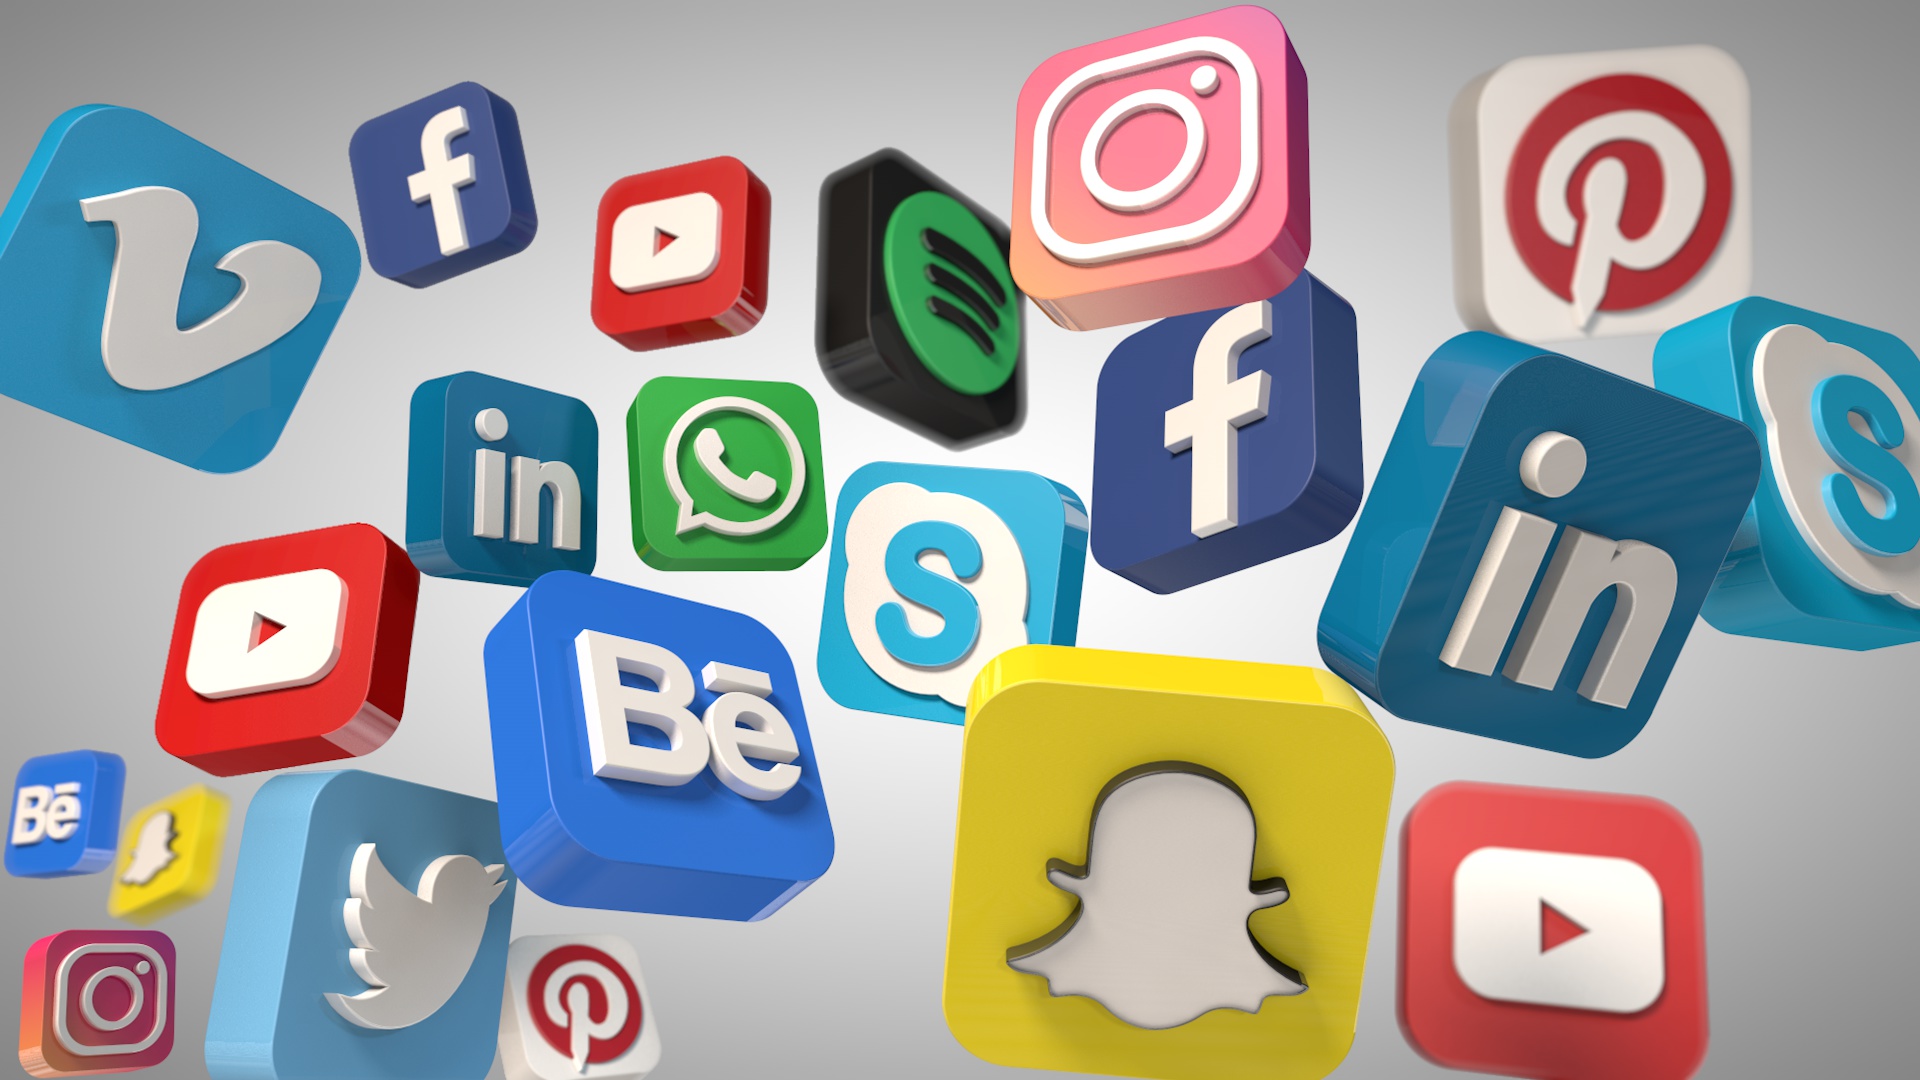 An assortment of social media icons 